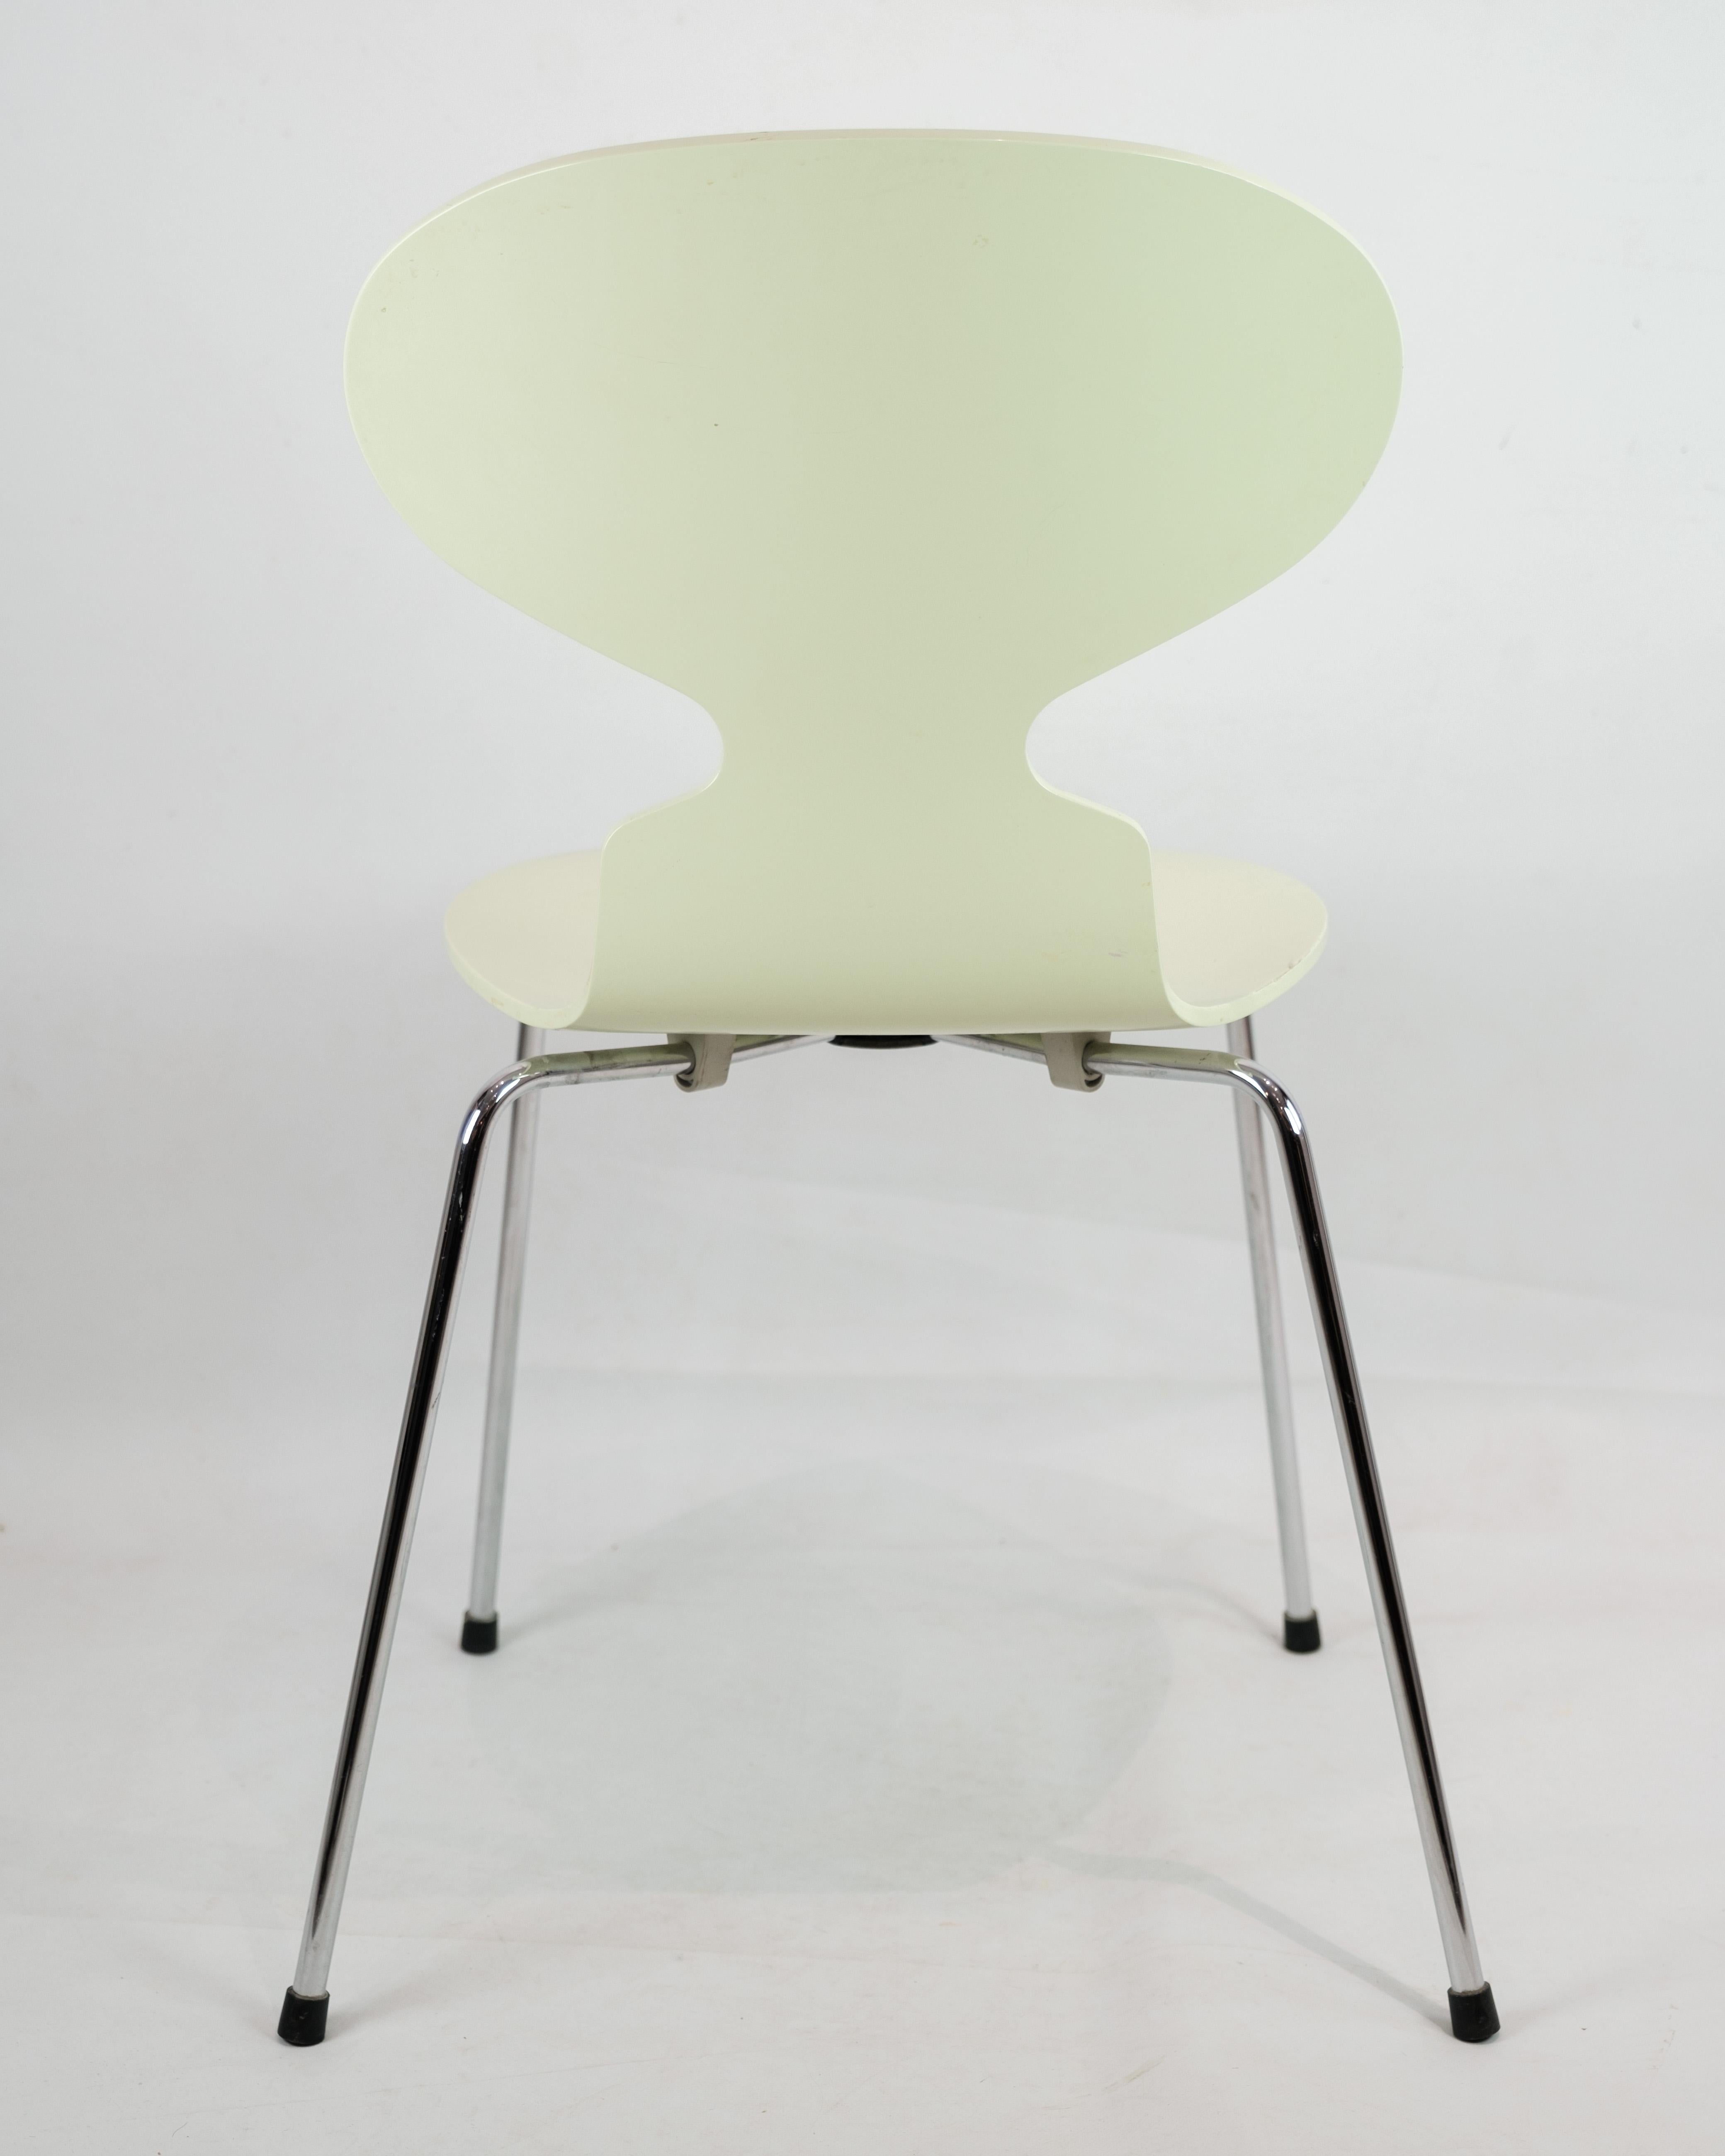 Chrome Original Ant Chairs Model 3101 In Pastel Green By Arne Jacobsen From 1970s For Sale